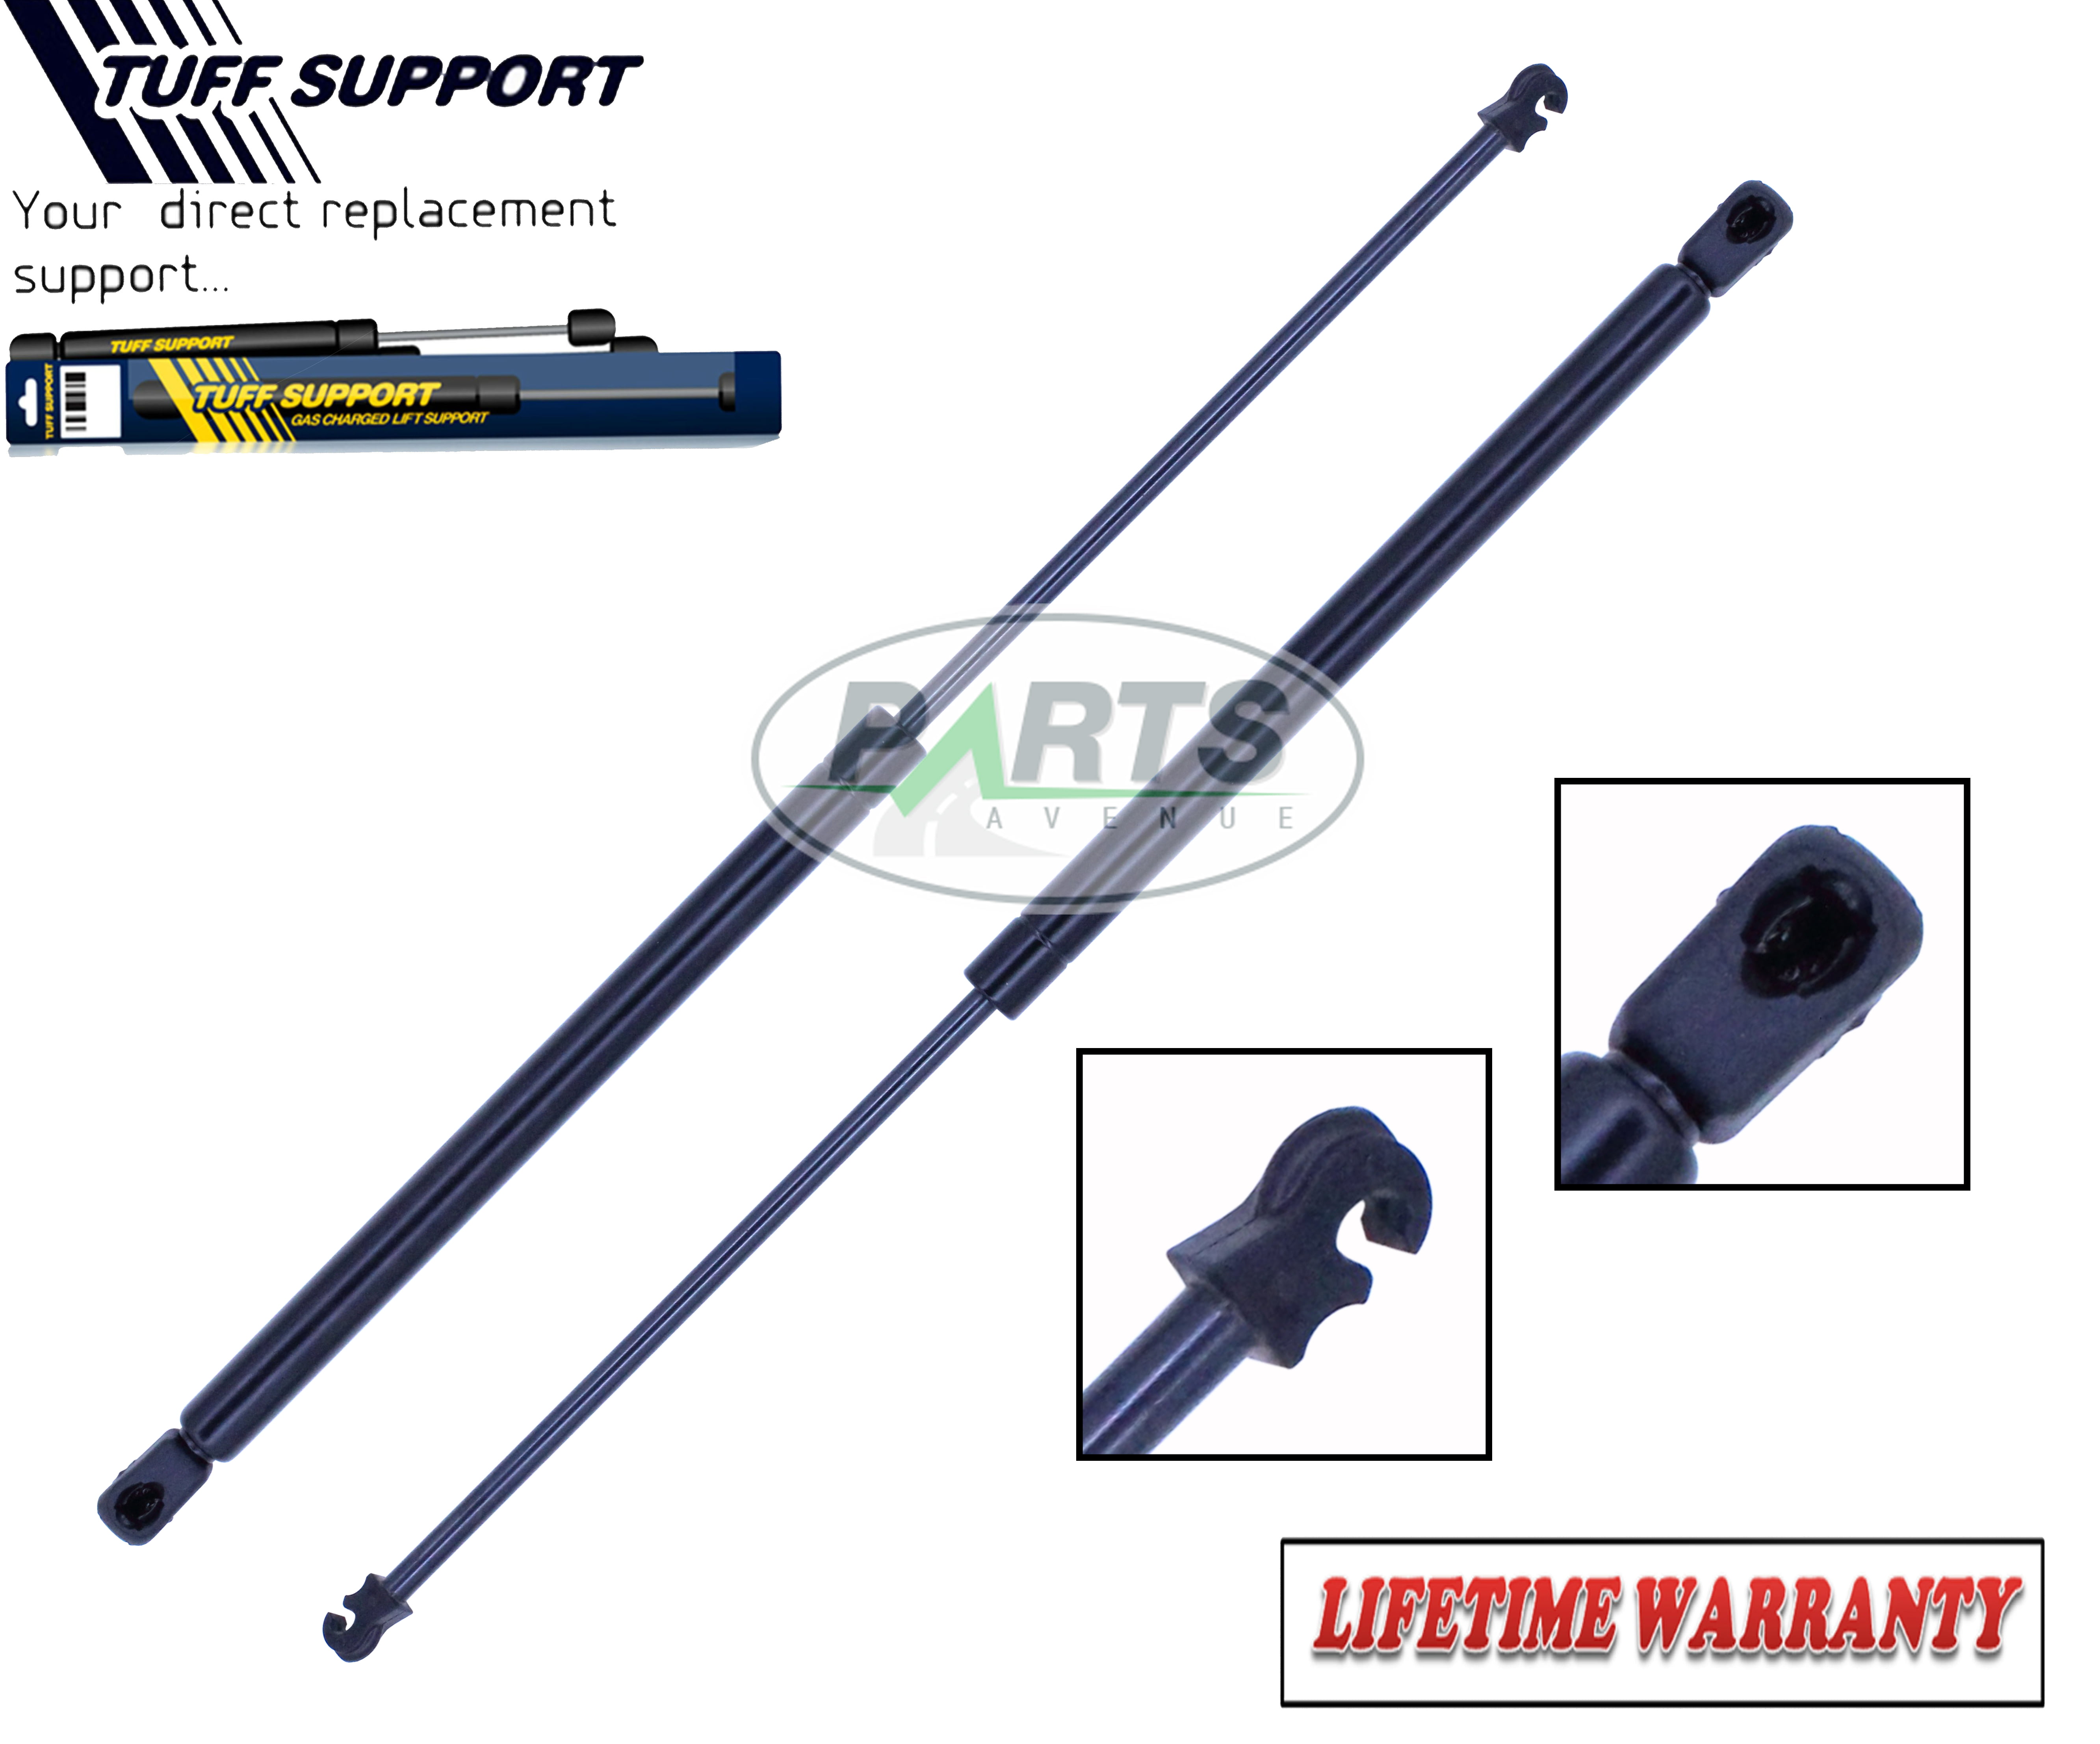 SET 2 Pieces Tuff Support Liftgate Lid Lift Supports 2005 TO 2015 Nissan Xterra